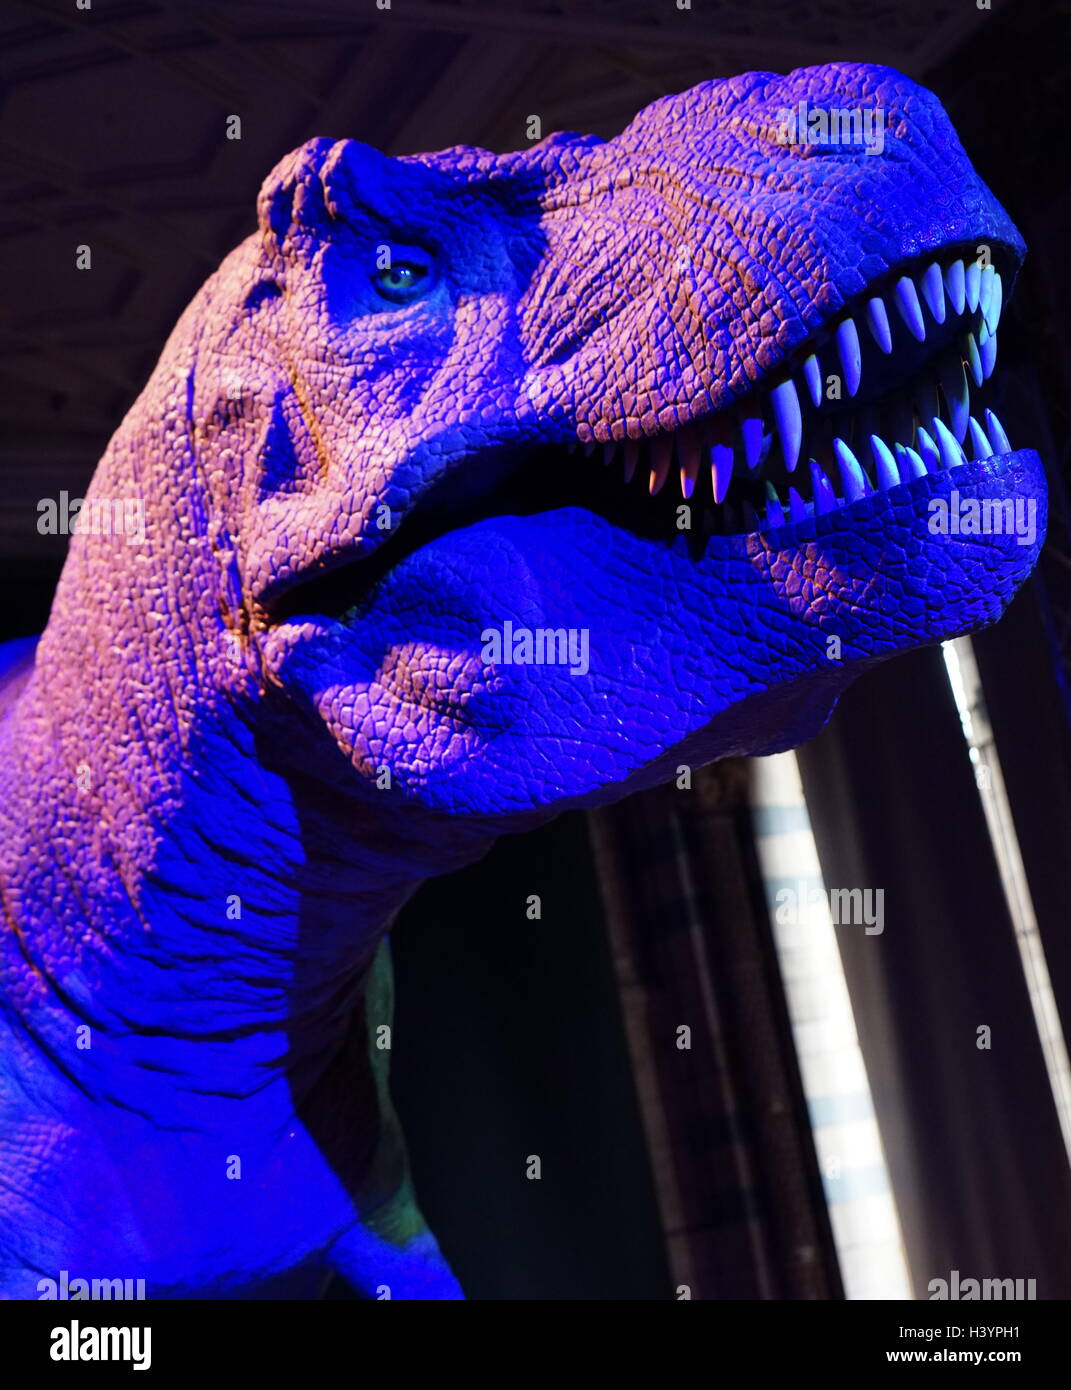 Animatronic Dinosaur (T-Rex). Animatronics refers to the use on robotic devices to emulate lifelike characteristics to an otherwise inanimate object. Dated 21st Century Stock Photo